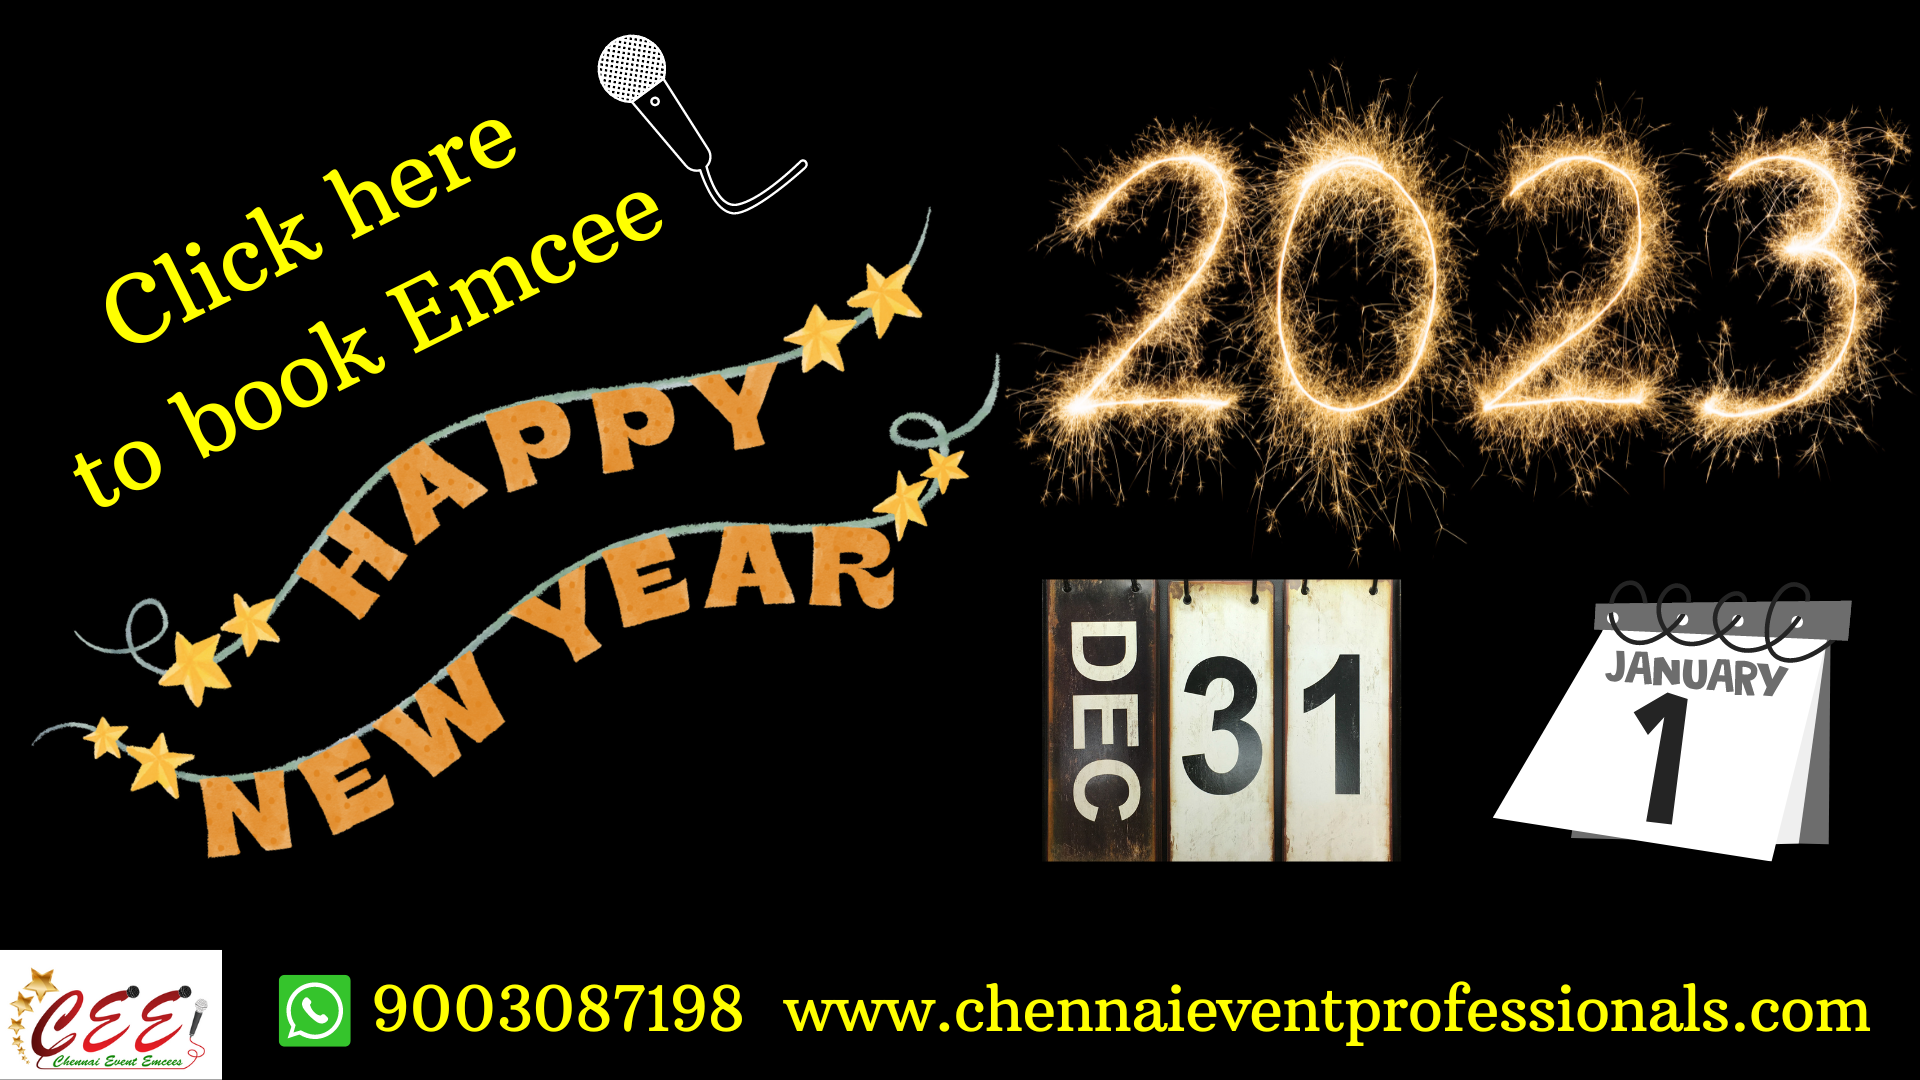 Anchors and Emcees for New Year Party Events 2023 in Chennai and Pondicherry